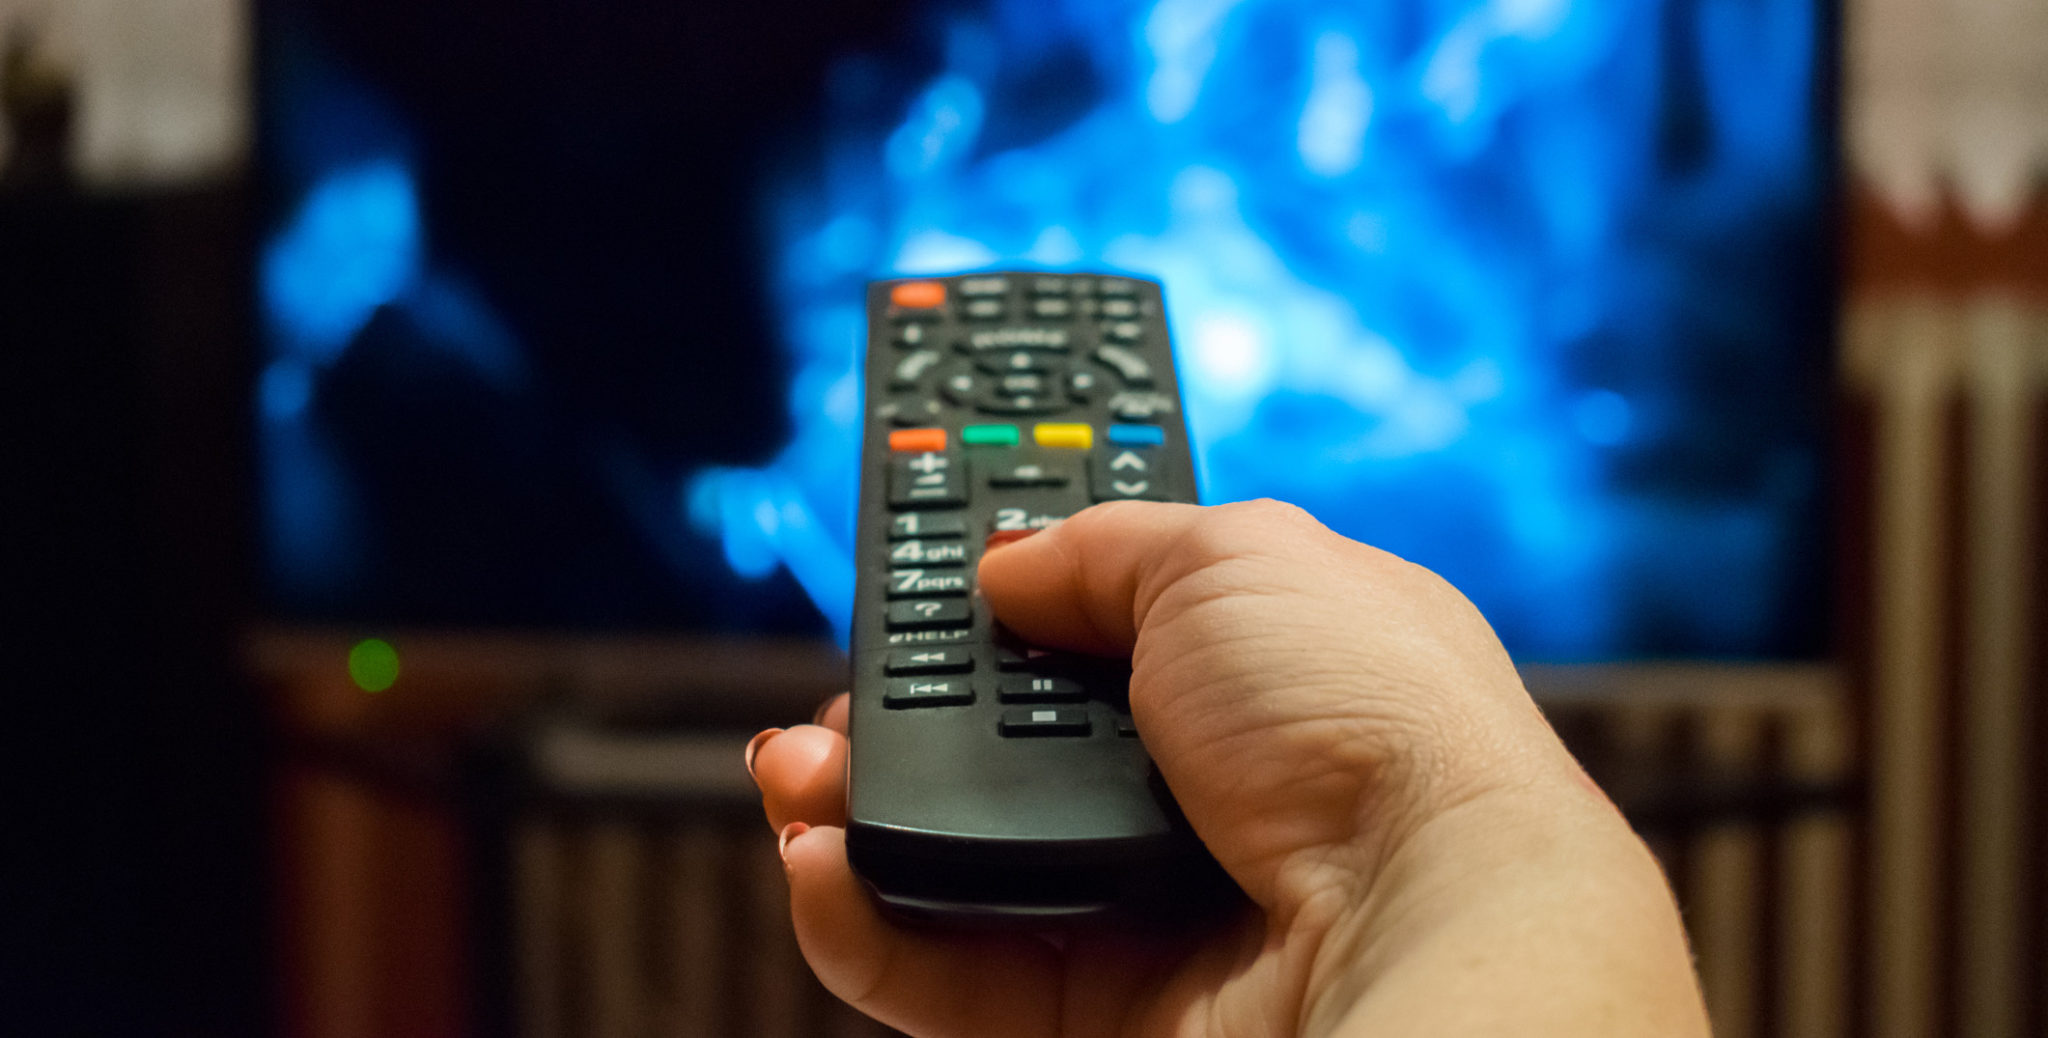 MOBITV Wants to Help Cable TV Companies Become Streaming Companies